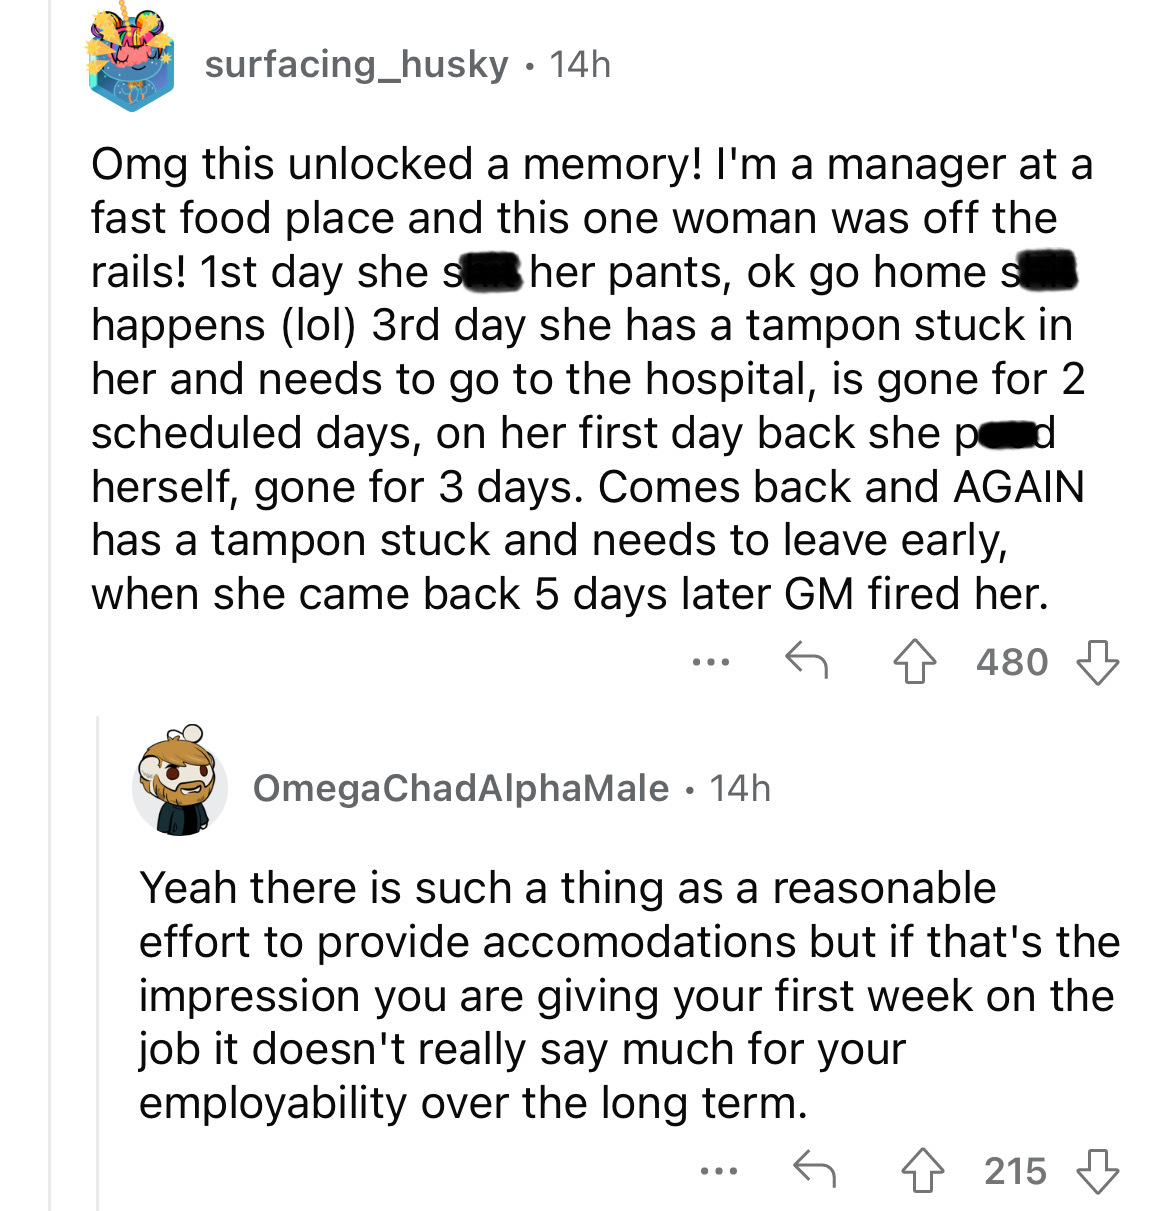 document - surfacing_husky 14h Omg this unlocked a memory! I'm a manager at a fast food place and this one woman was off the rails! 1st day she s her pants, ok go home s happens lol 3rd day she has a tampon stuck in her and needs to go to the hospital, is